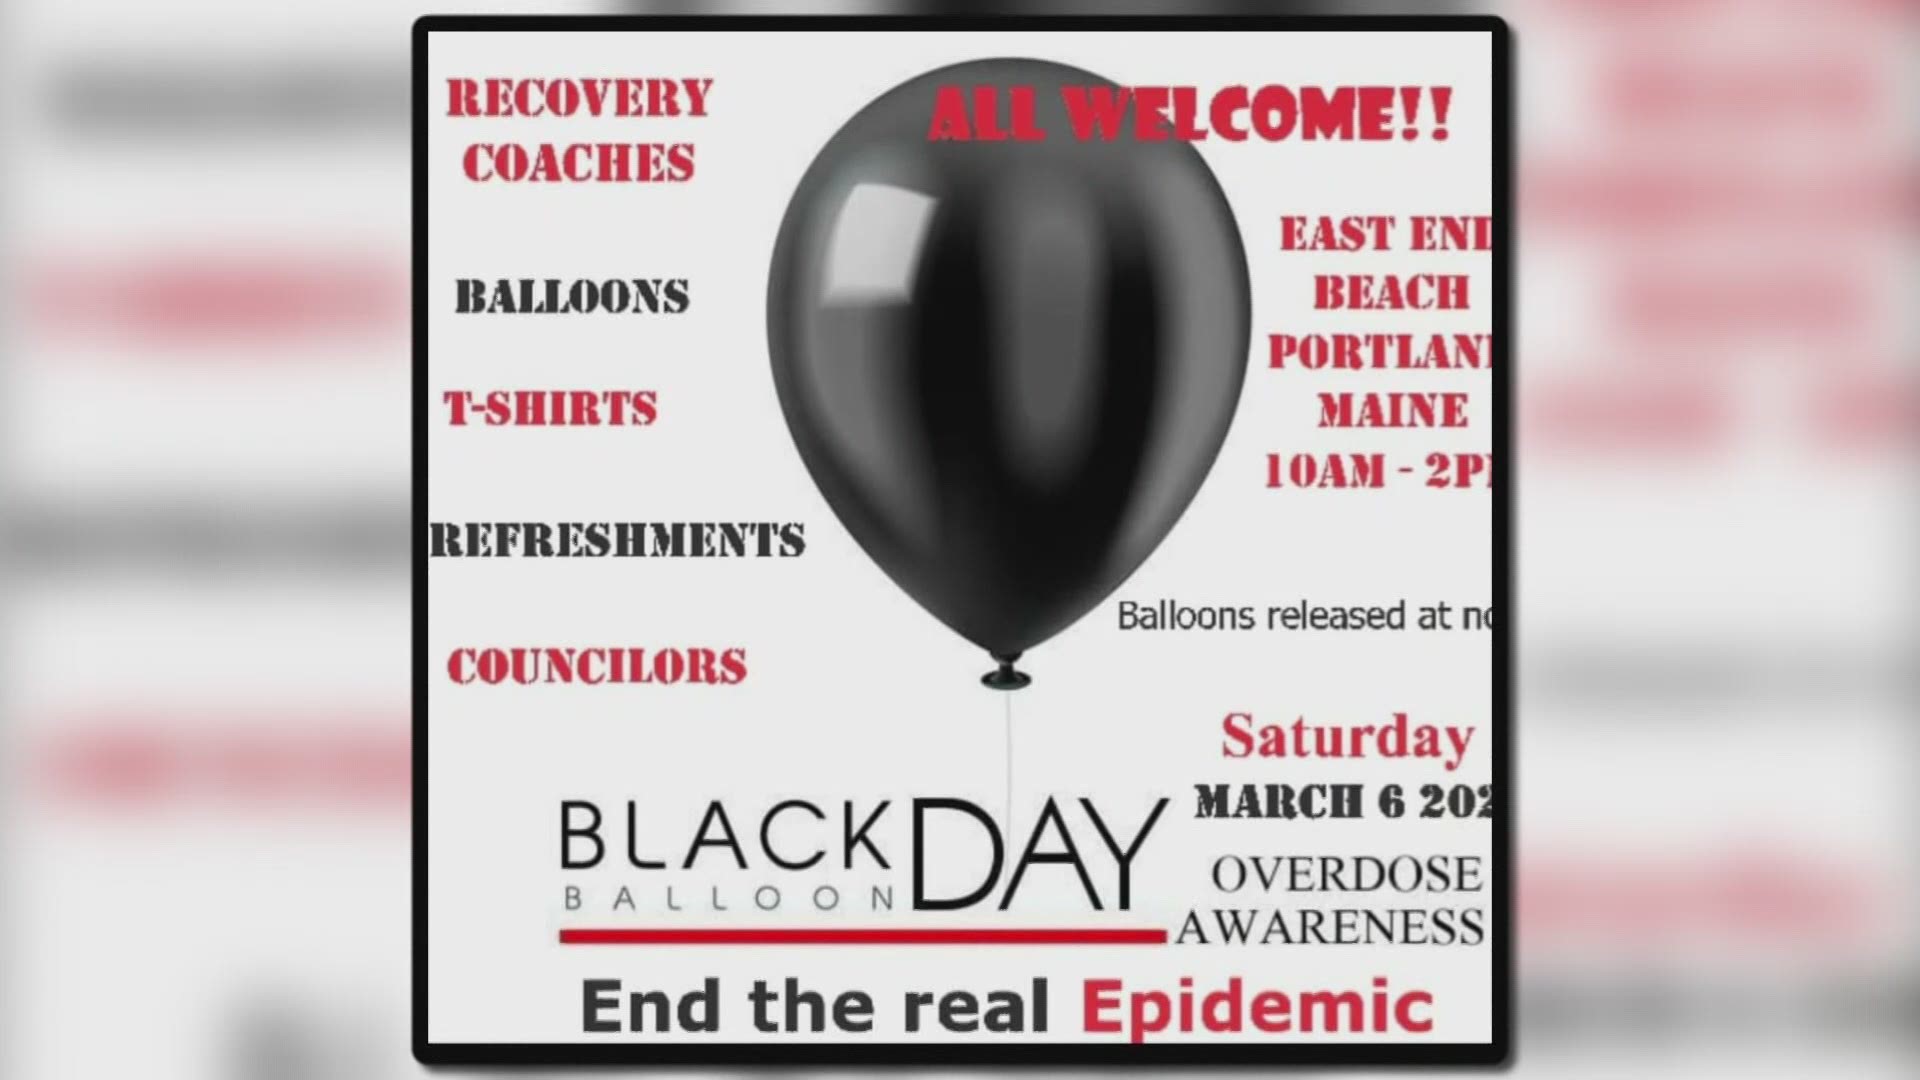 2020 was the worst year Maine has seen to date for drug-related overdoses, and this event hopes to bring more attention to those who lost their lives.